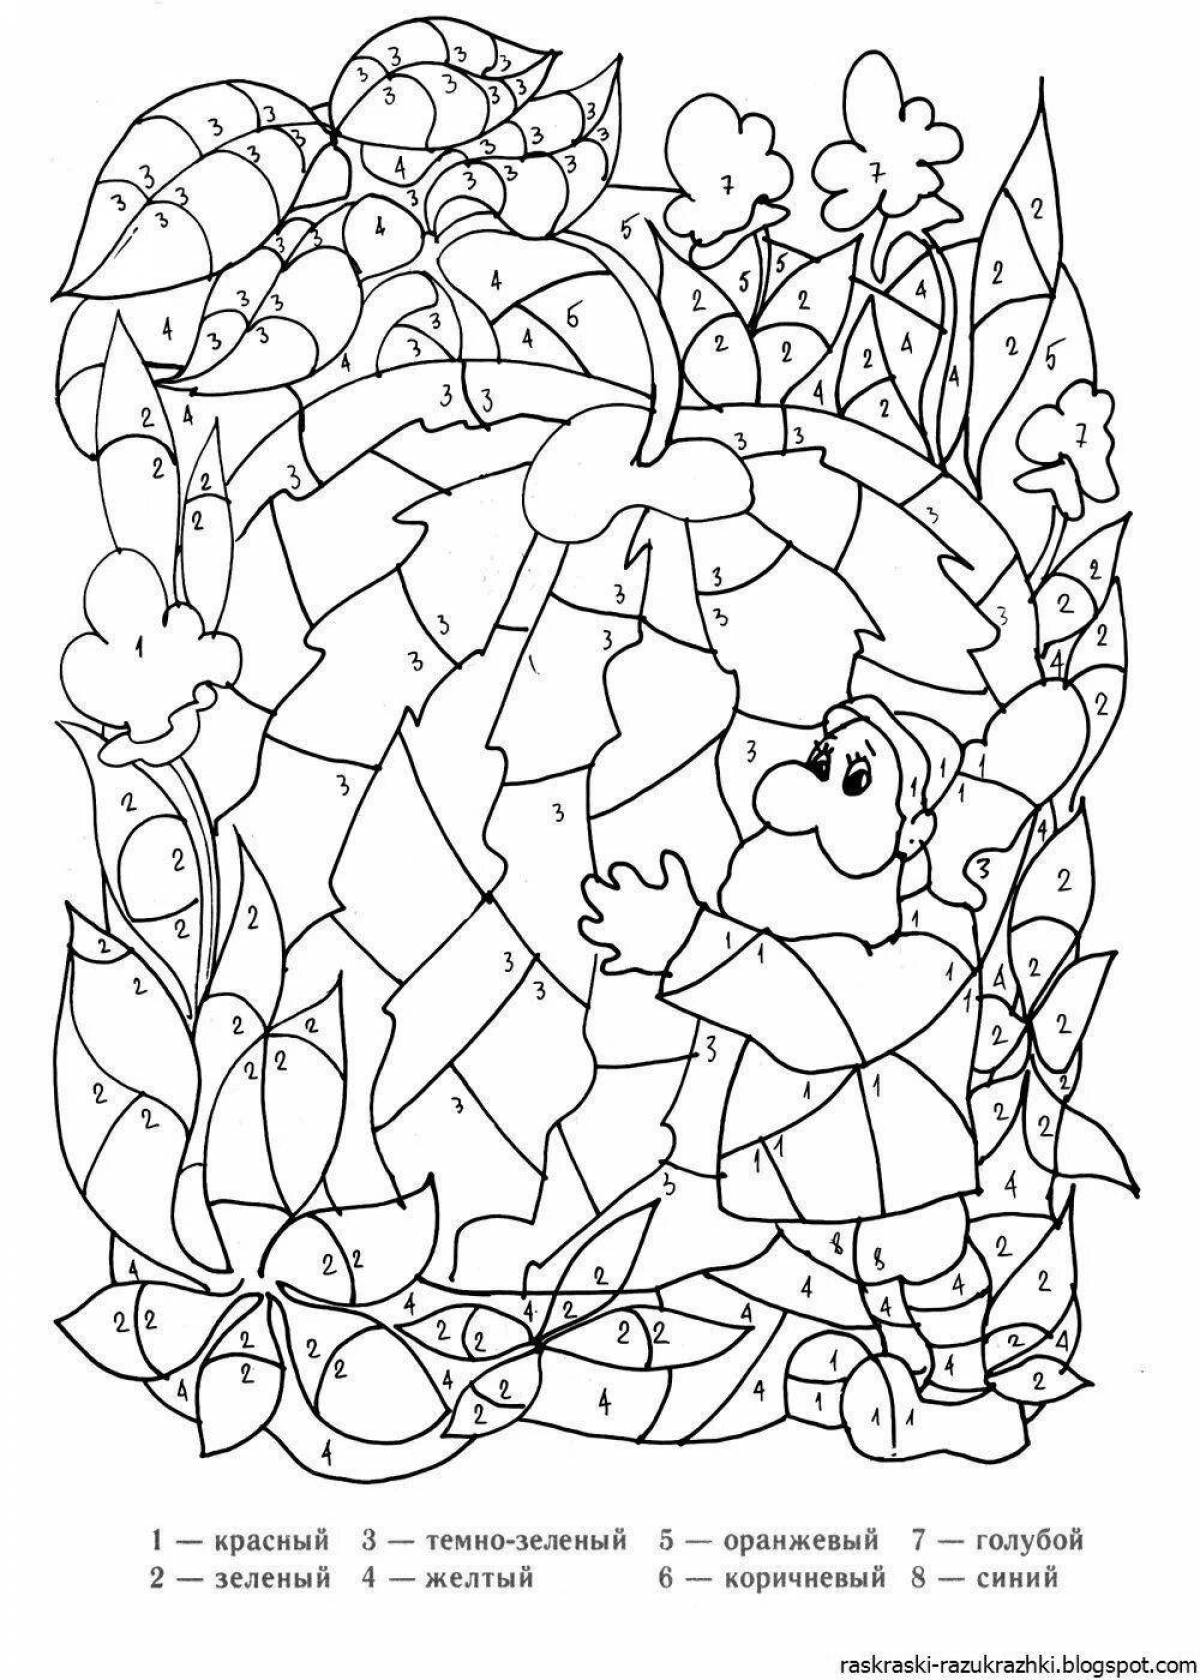 1st grade brightly colored coloring page